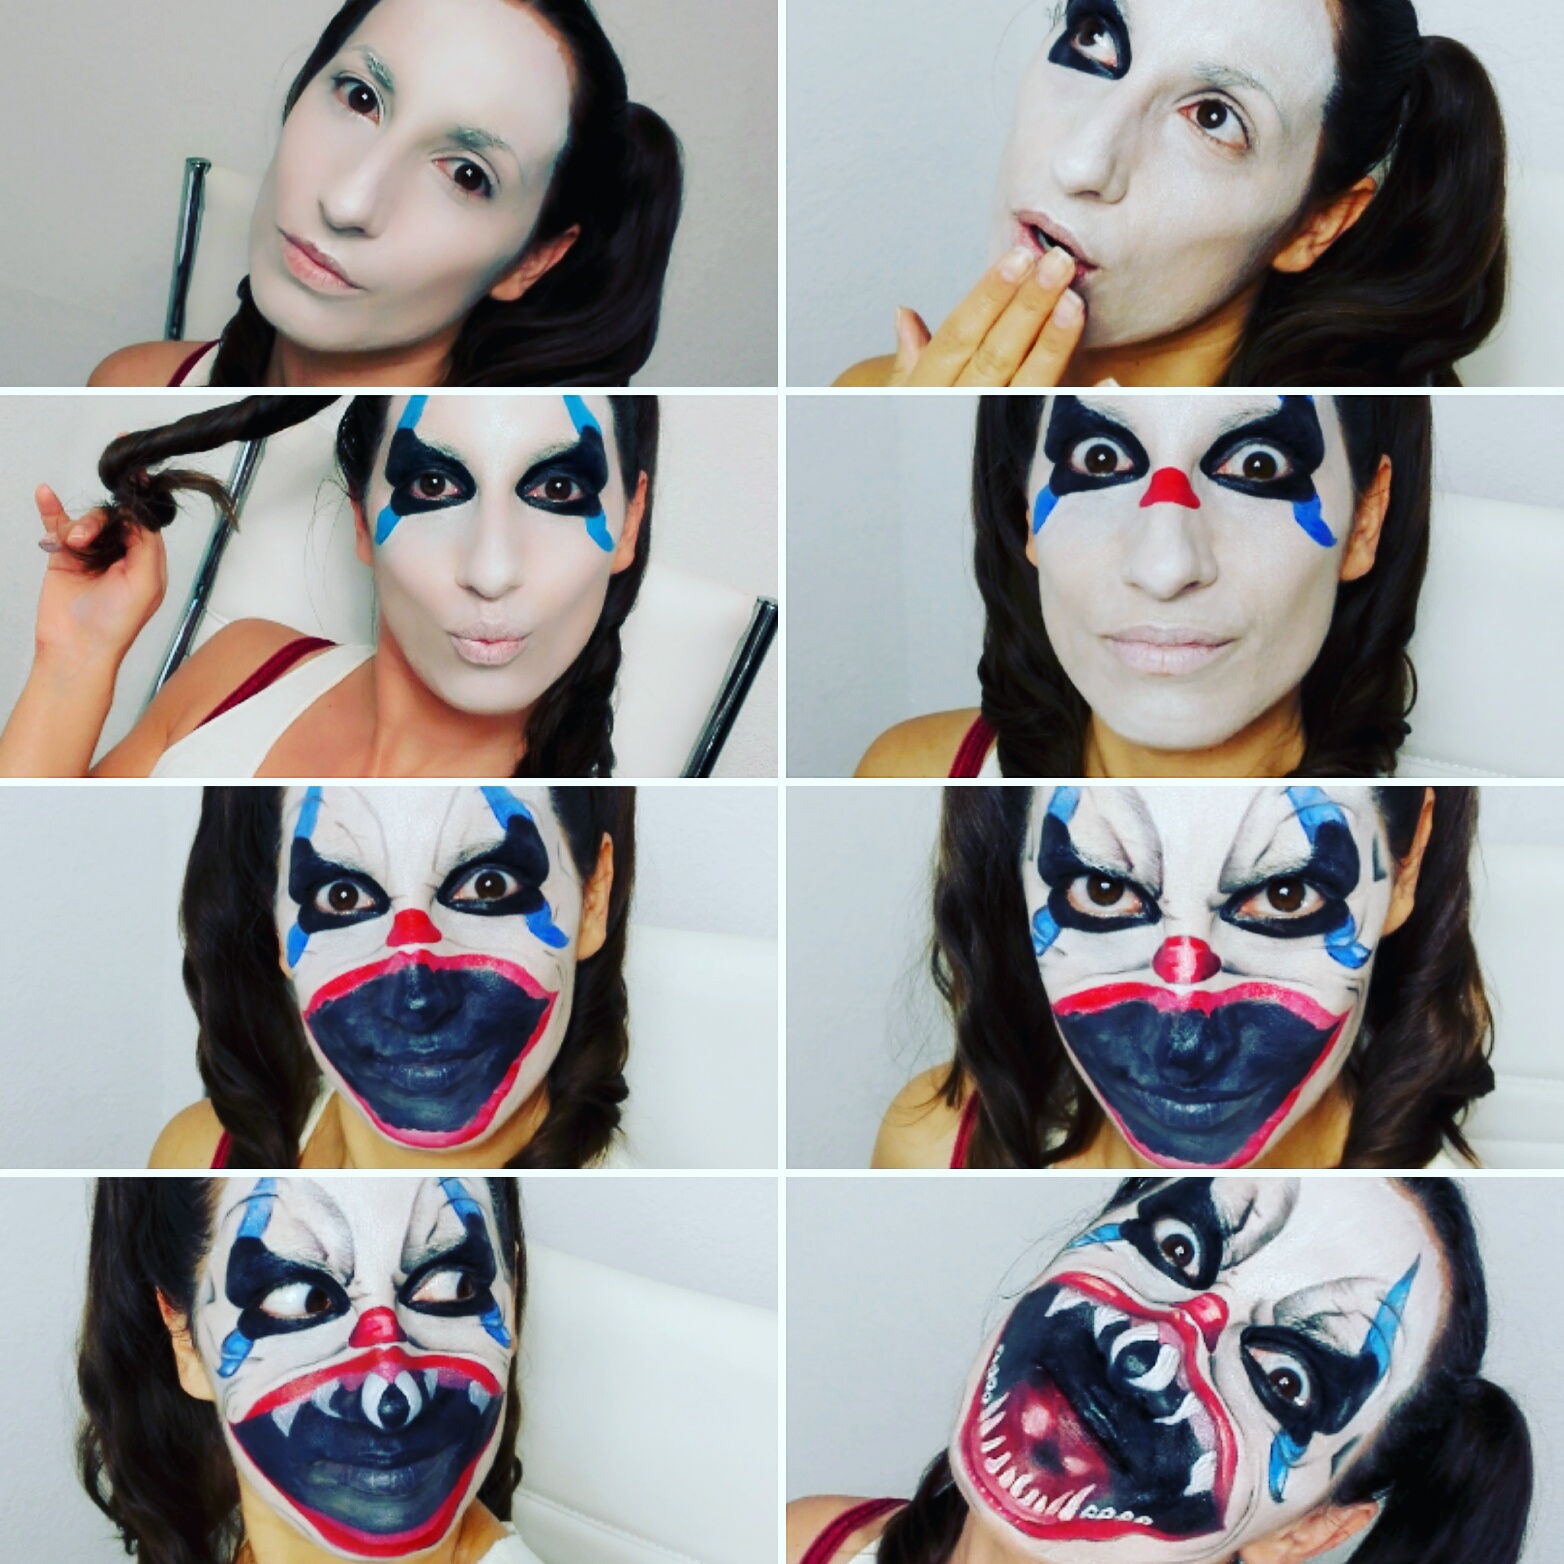 Sparkly Clown Halloween Makeup with Tutorial by KatieAlves on DeviantArt